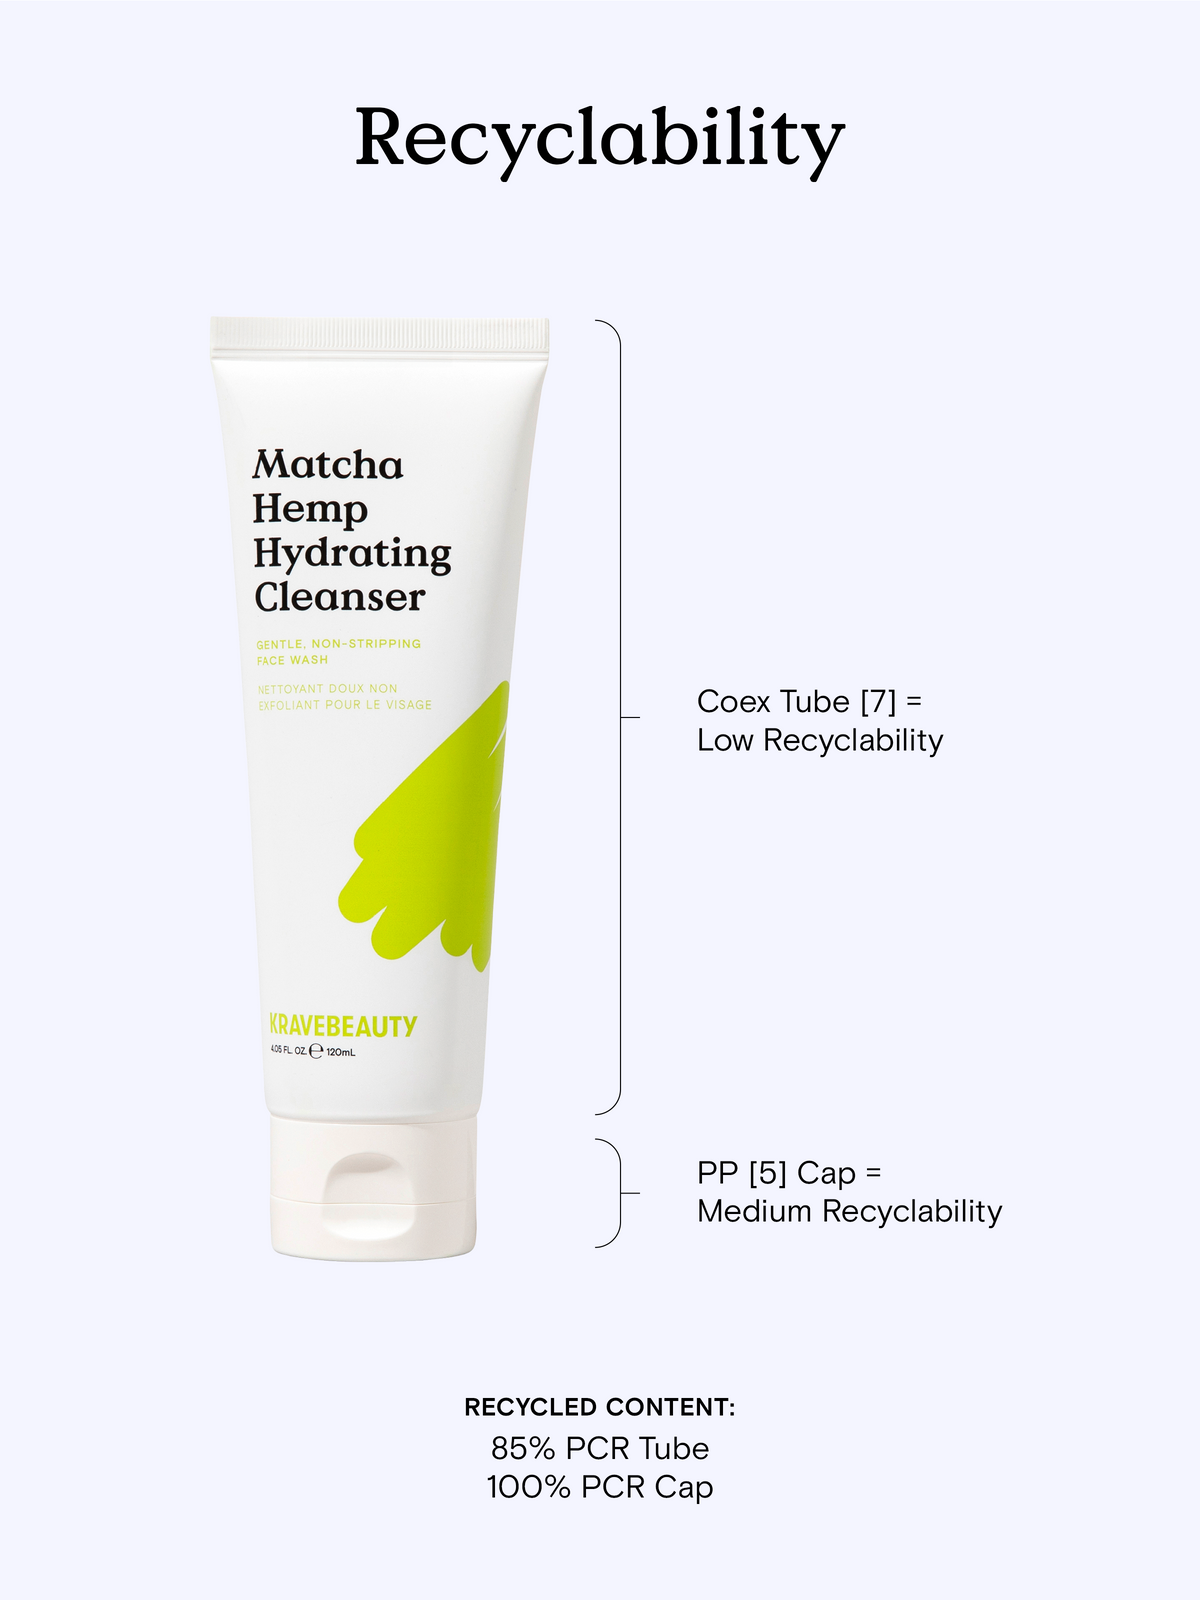 Recyclability of Matcha Hemp Hydrating Cleanser. The 85% PCR tube has low recyclability and the PP [5] cap has medium recyclability. #size_4.05 oz / 120 ml